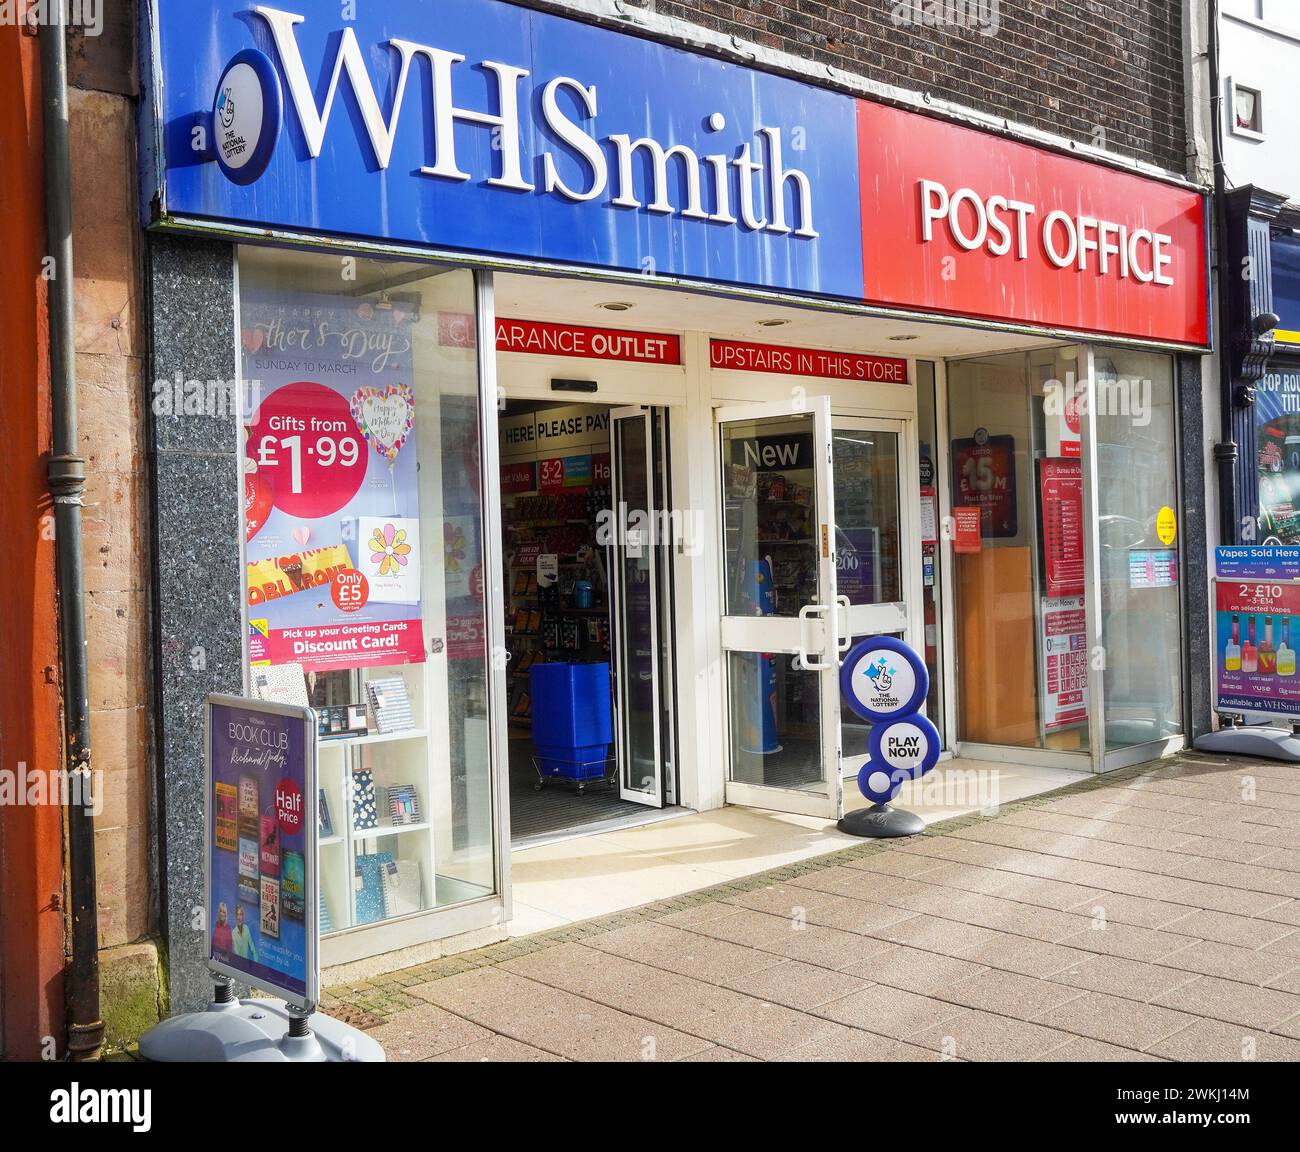 Exterior and entrance of the stationery shop and outlet W H SMITH and the POST OFFICE, Ayr, UK Stock Photo